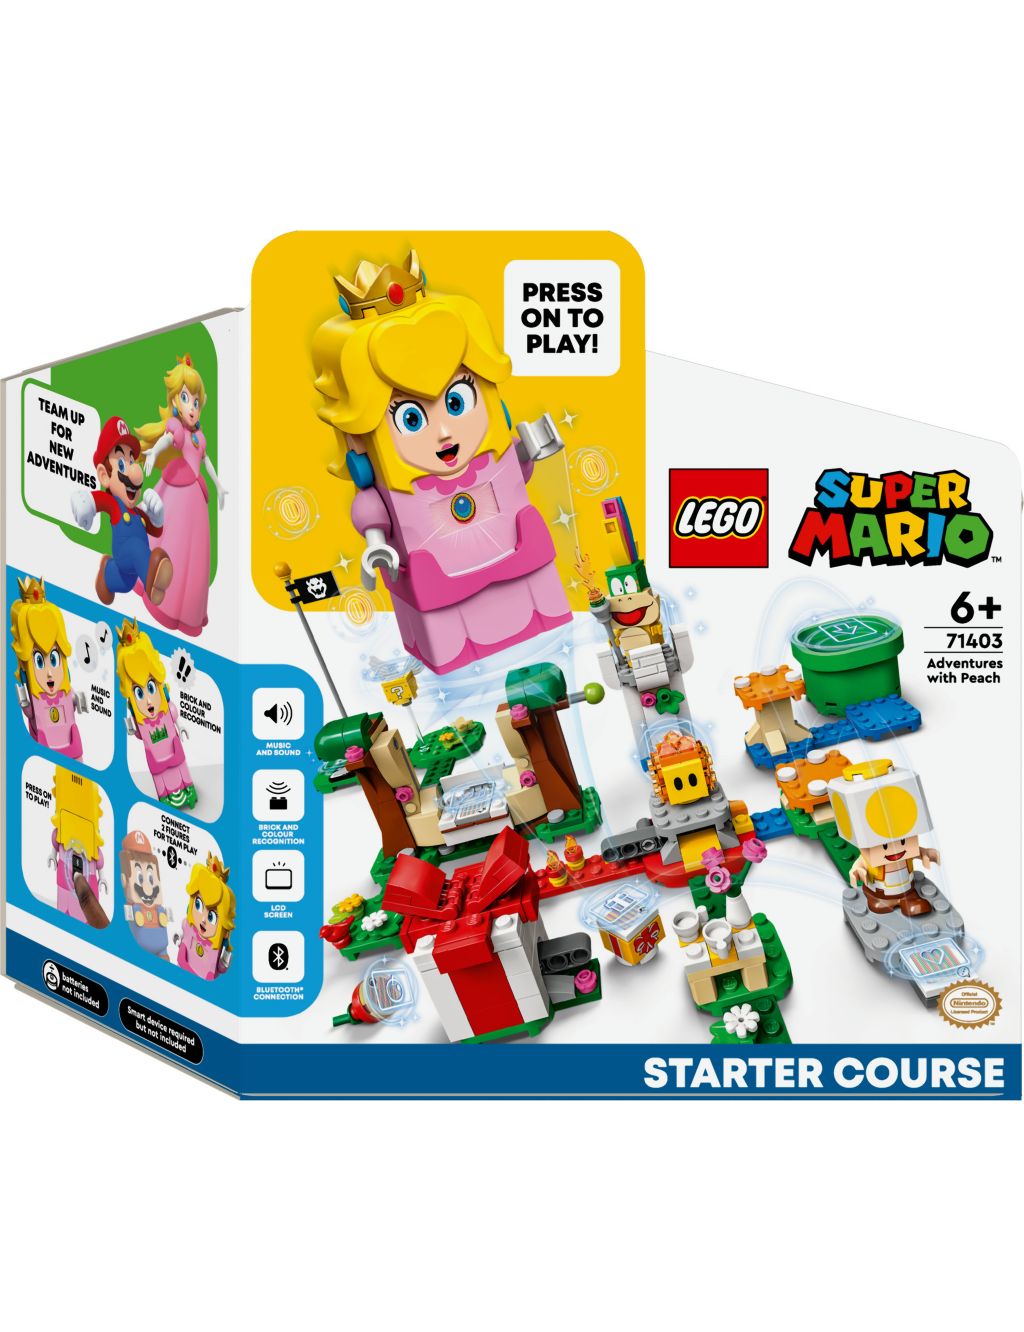 LEGO® Super Mario™ Adventures with Peach Starter Course (6+ Yrs) image 1